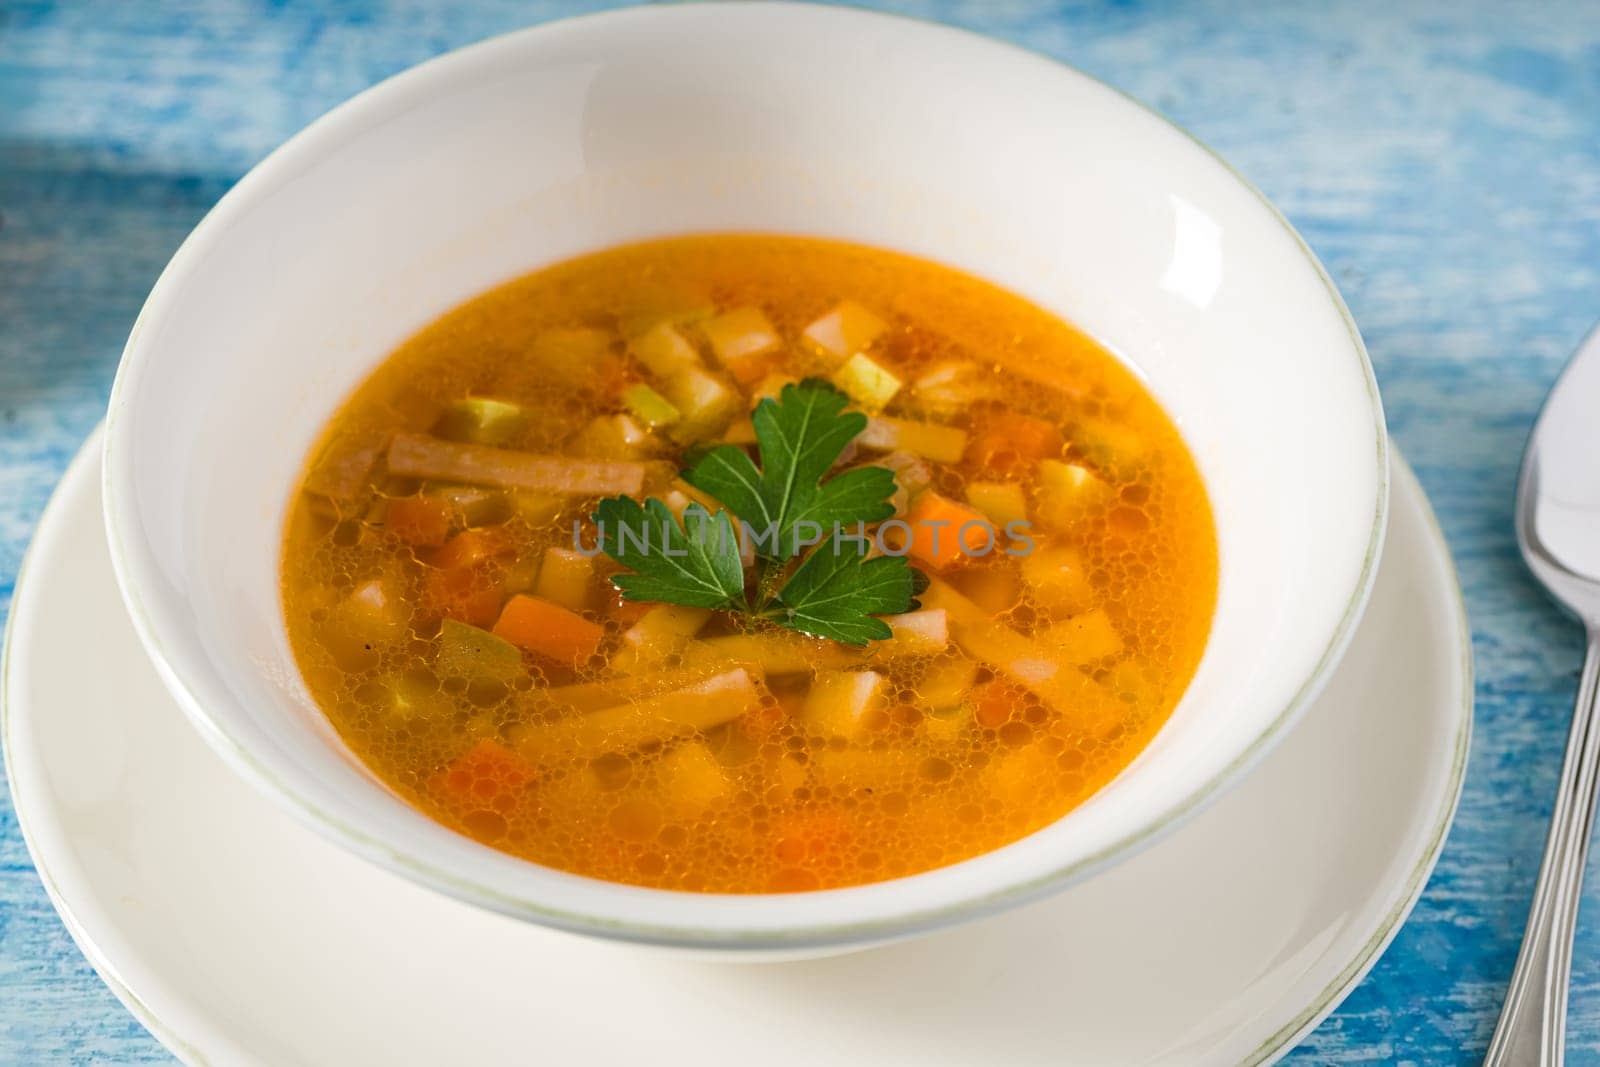 Top view of healthy vegetable soup on white porcelain plate